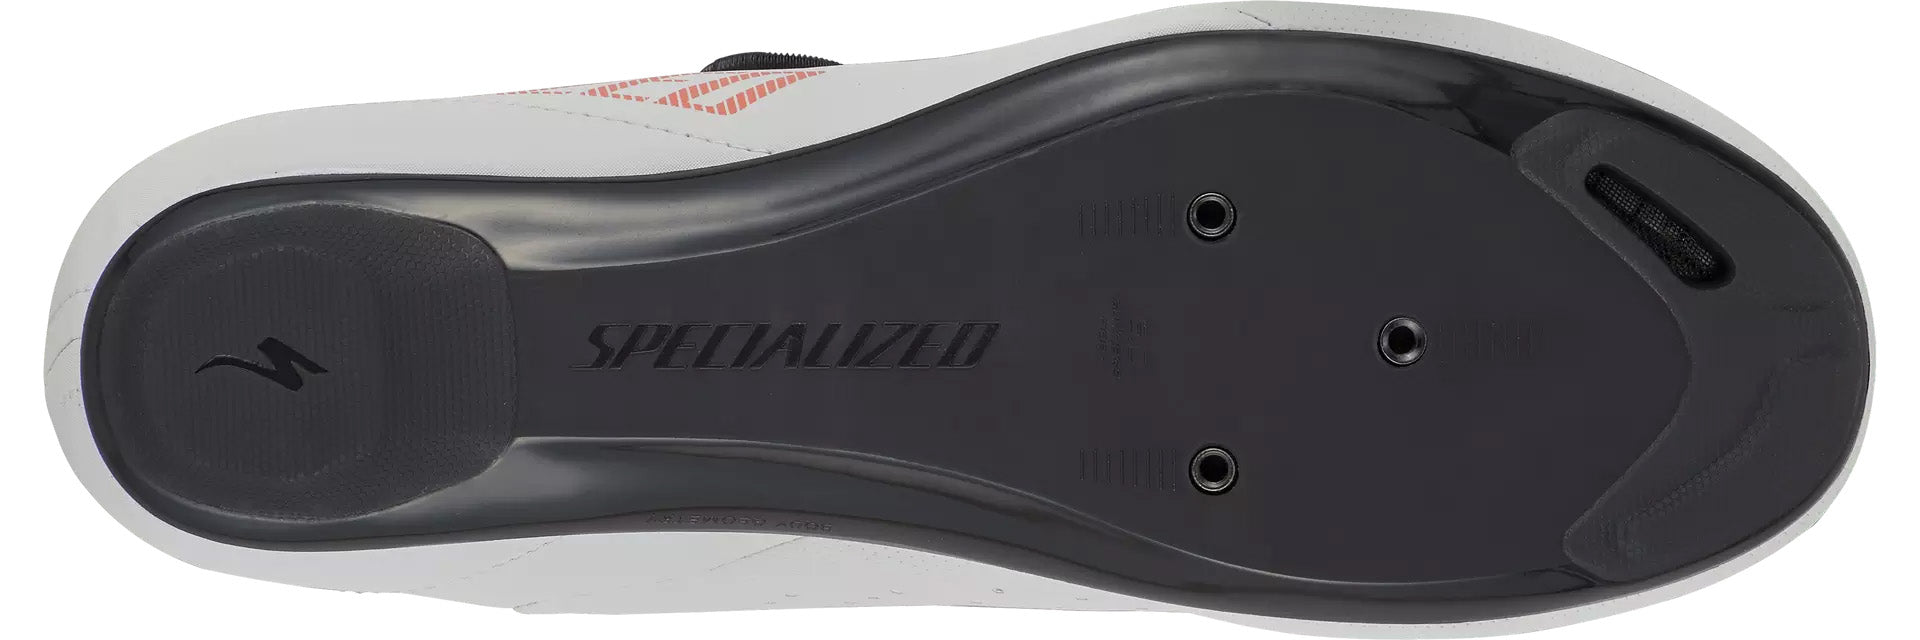 Specialized Torch 1.0 Road Shoes Dove Grey/Vivid Coral